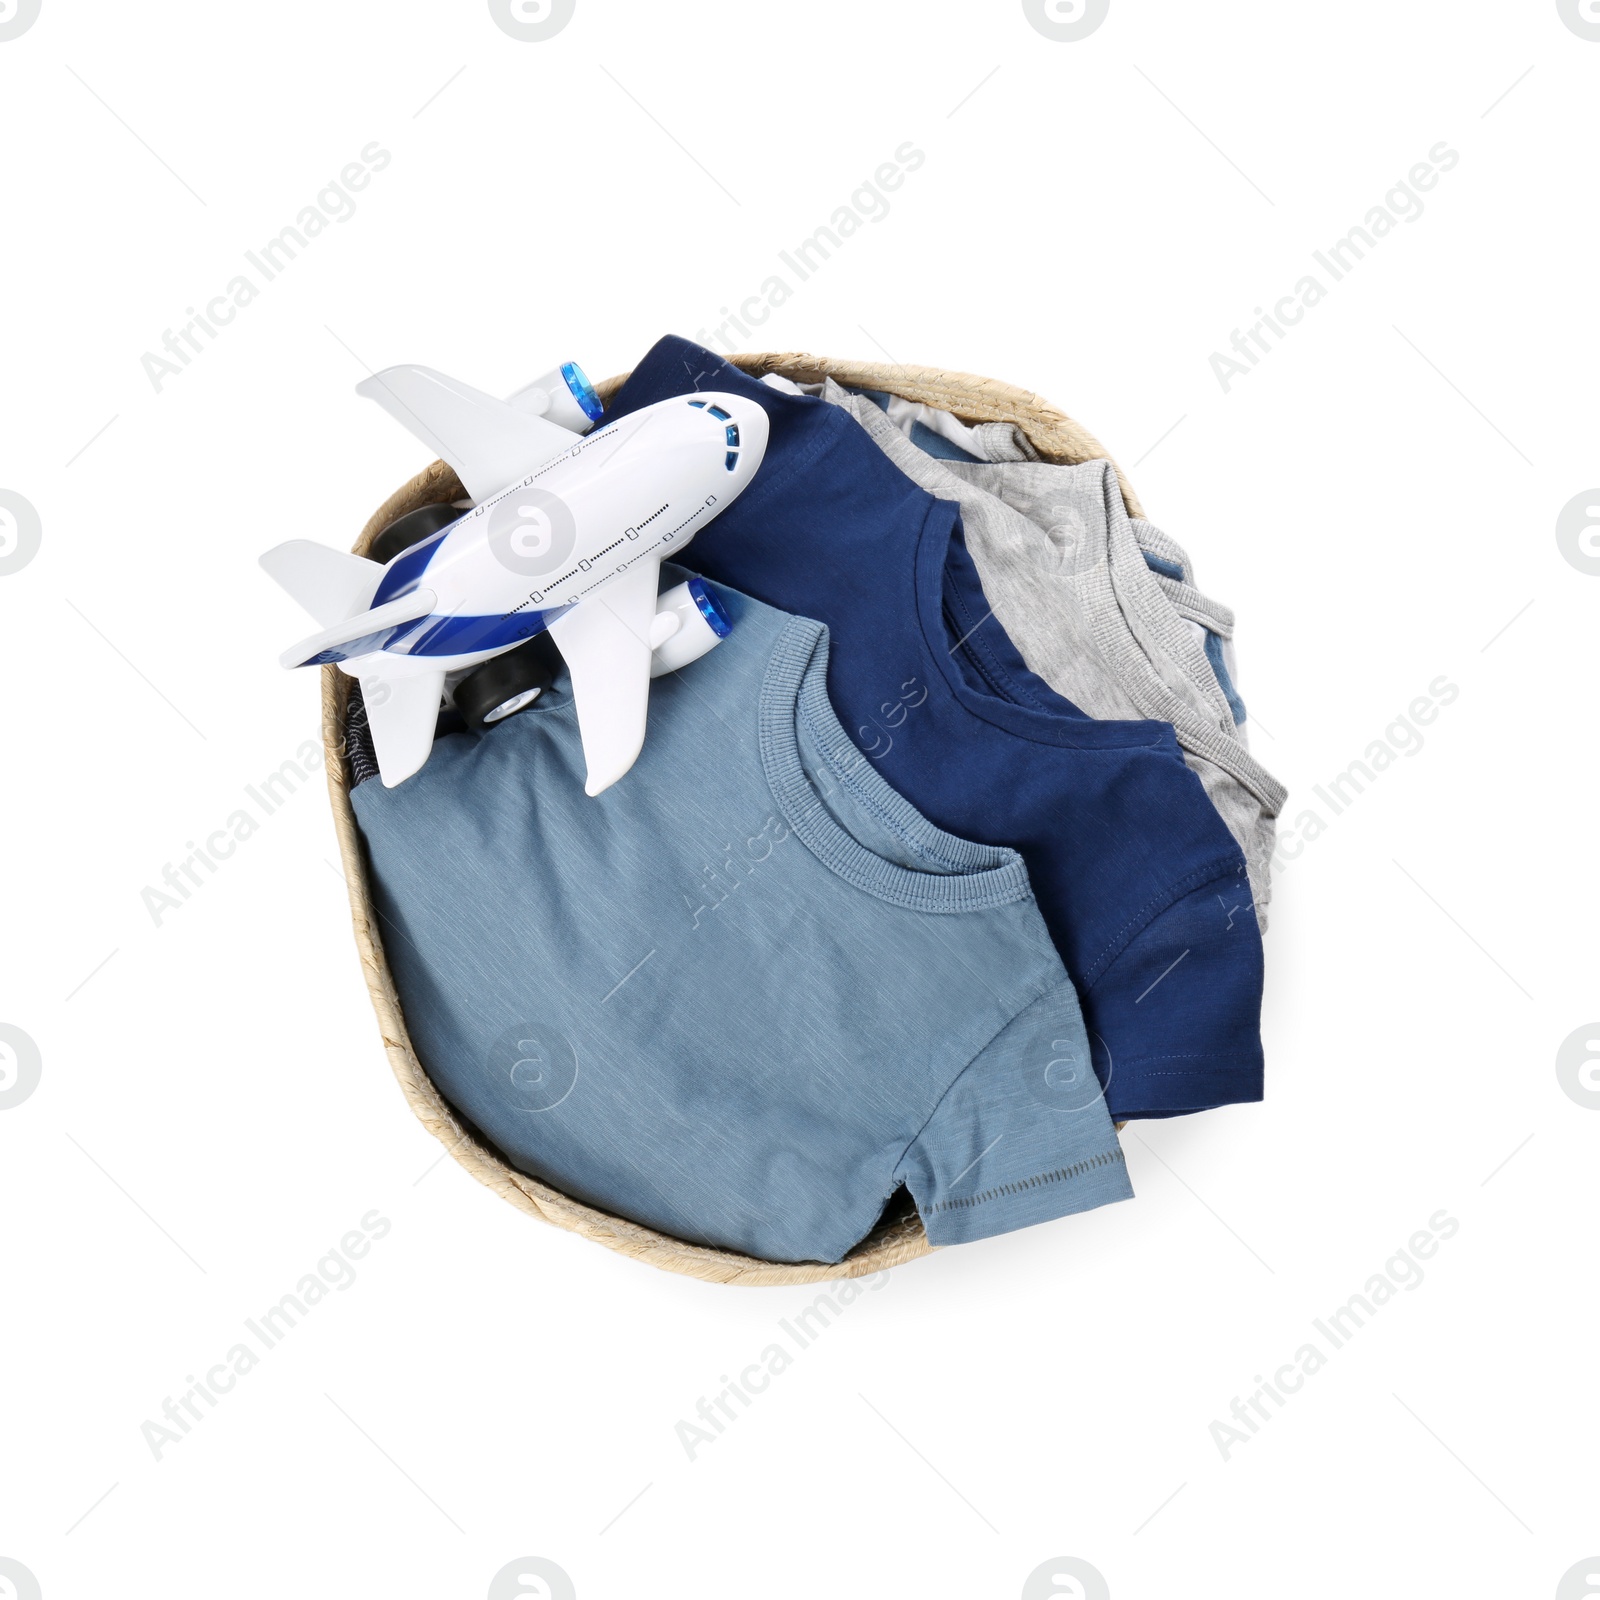 Photo of Laundry basket with baby clothes and toy isolated on white, top view